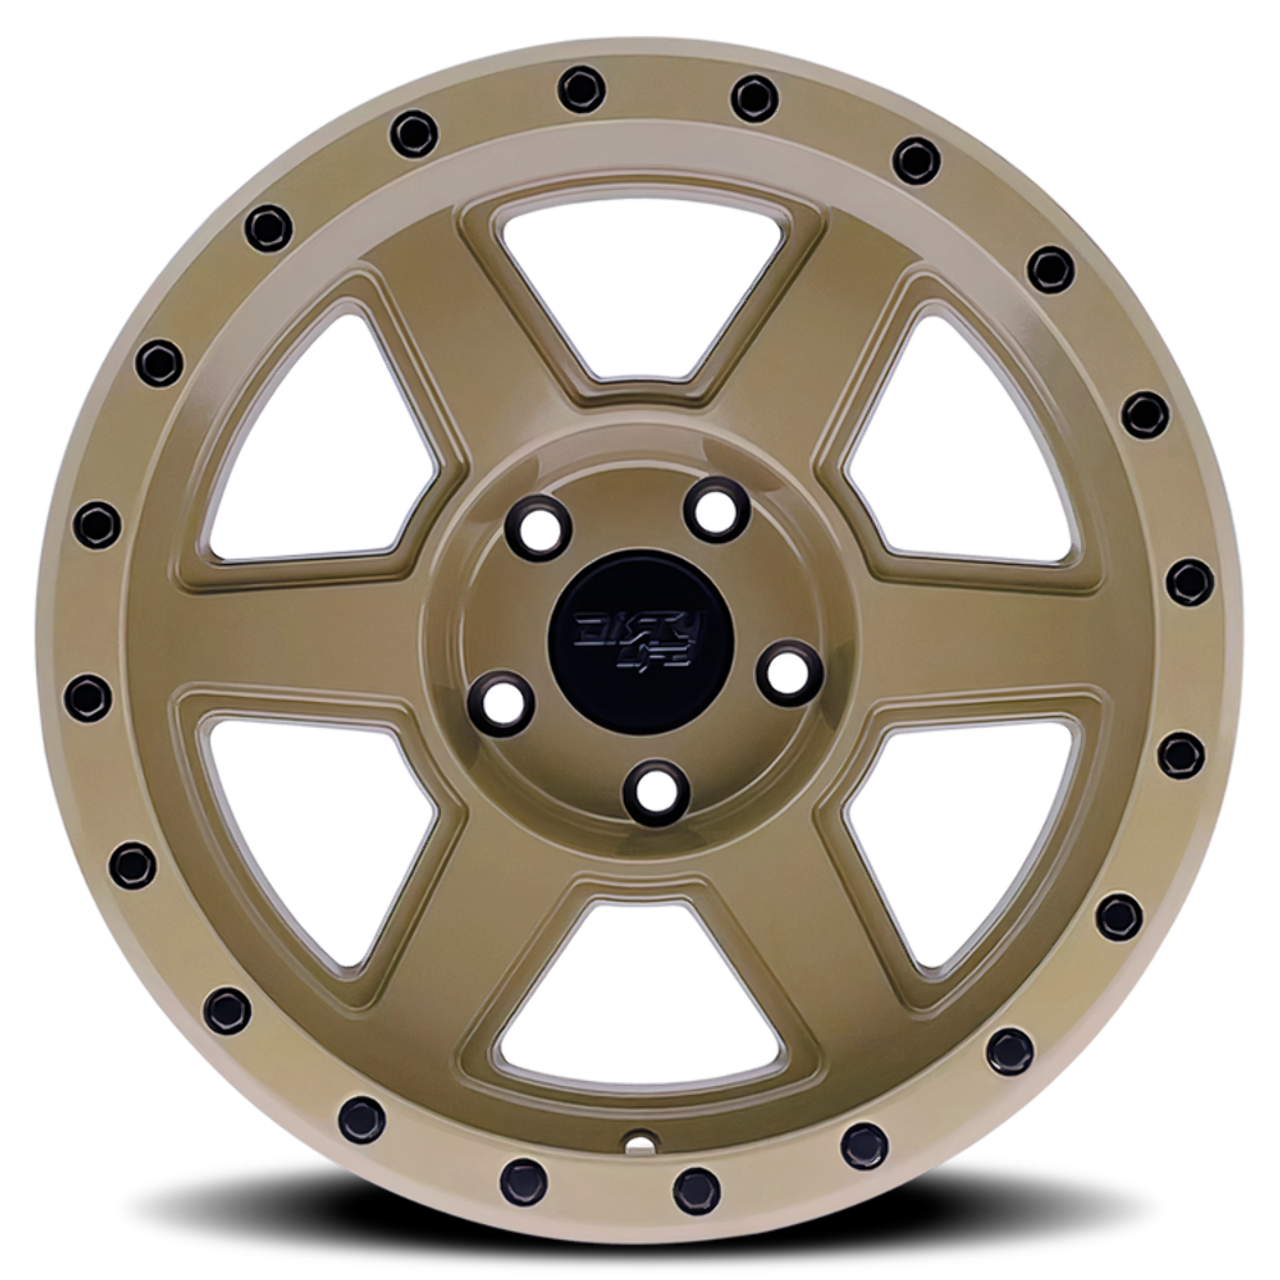 17" Dirty Life Compound 17x9 Desert Sand 6x5.5 -12mm For Chevy GMC Cadillac Rim